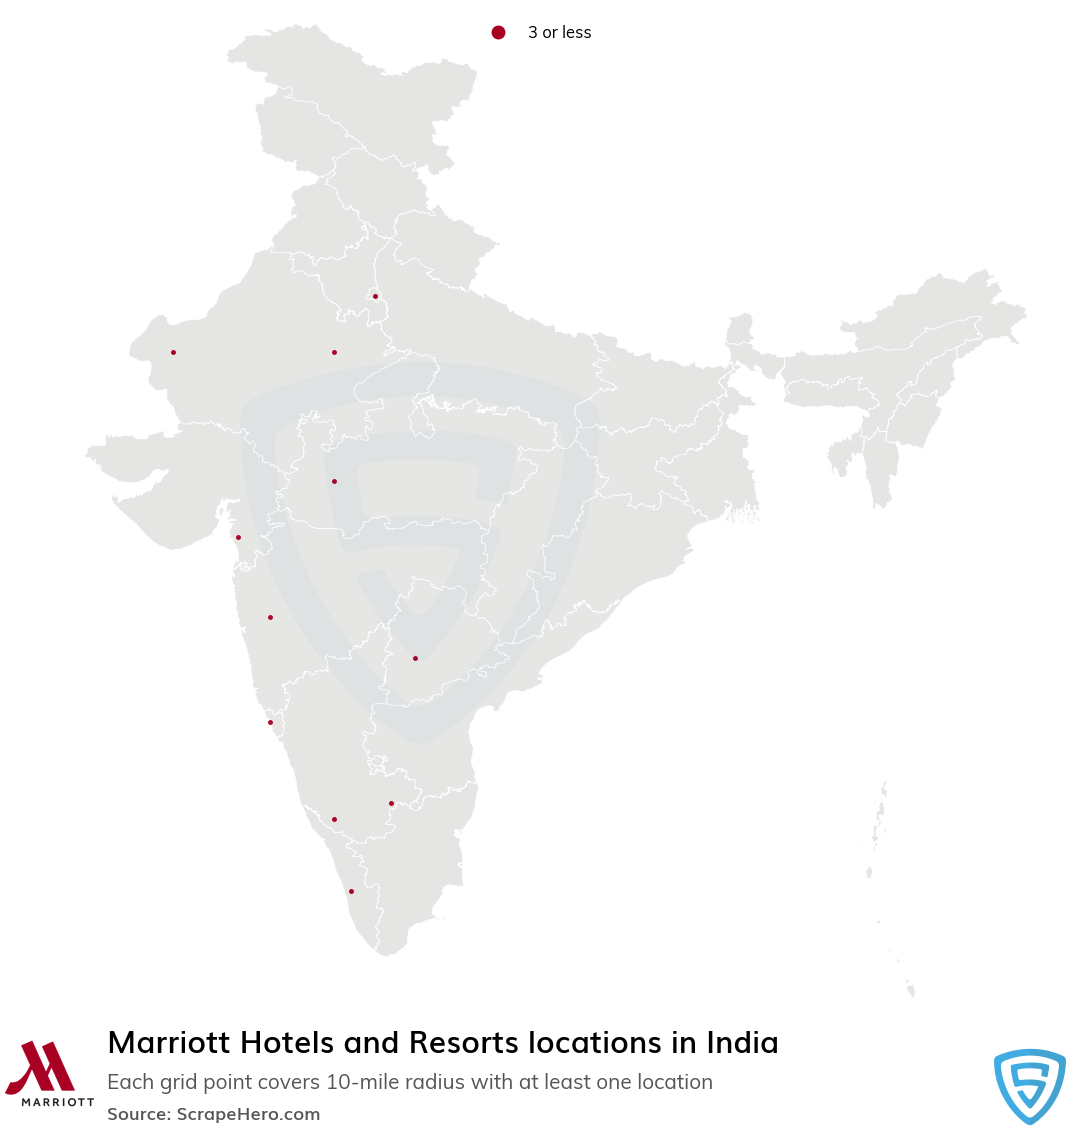 Marriott Hotels and Resorts locations